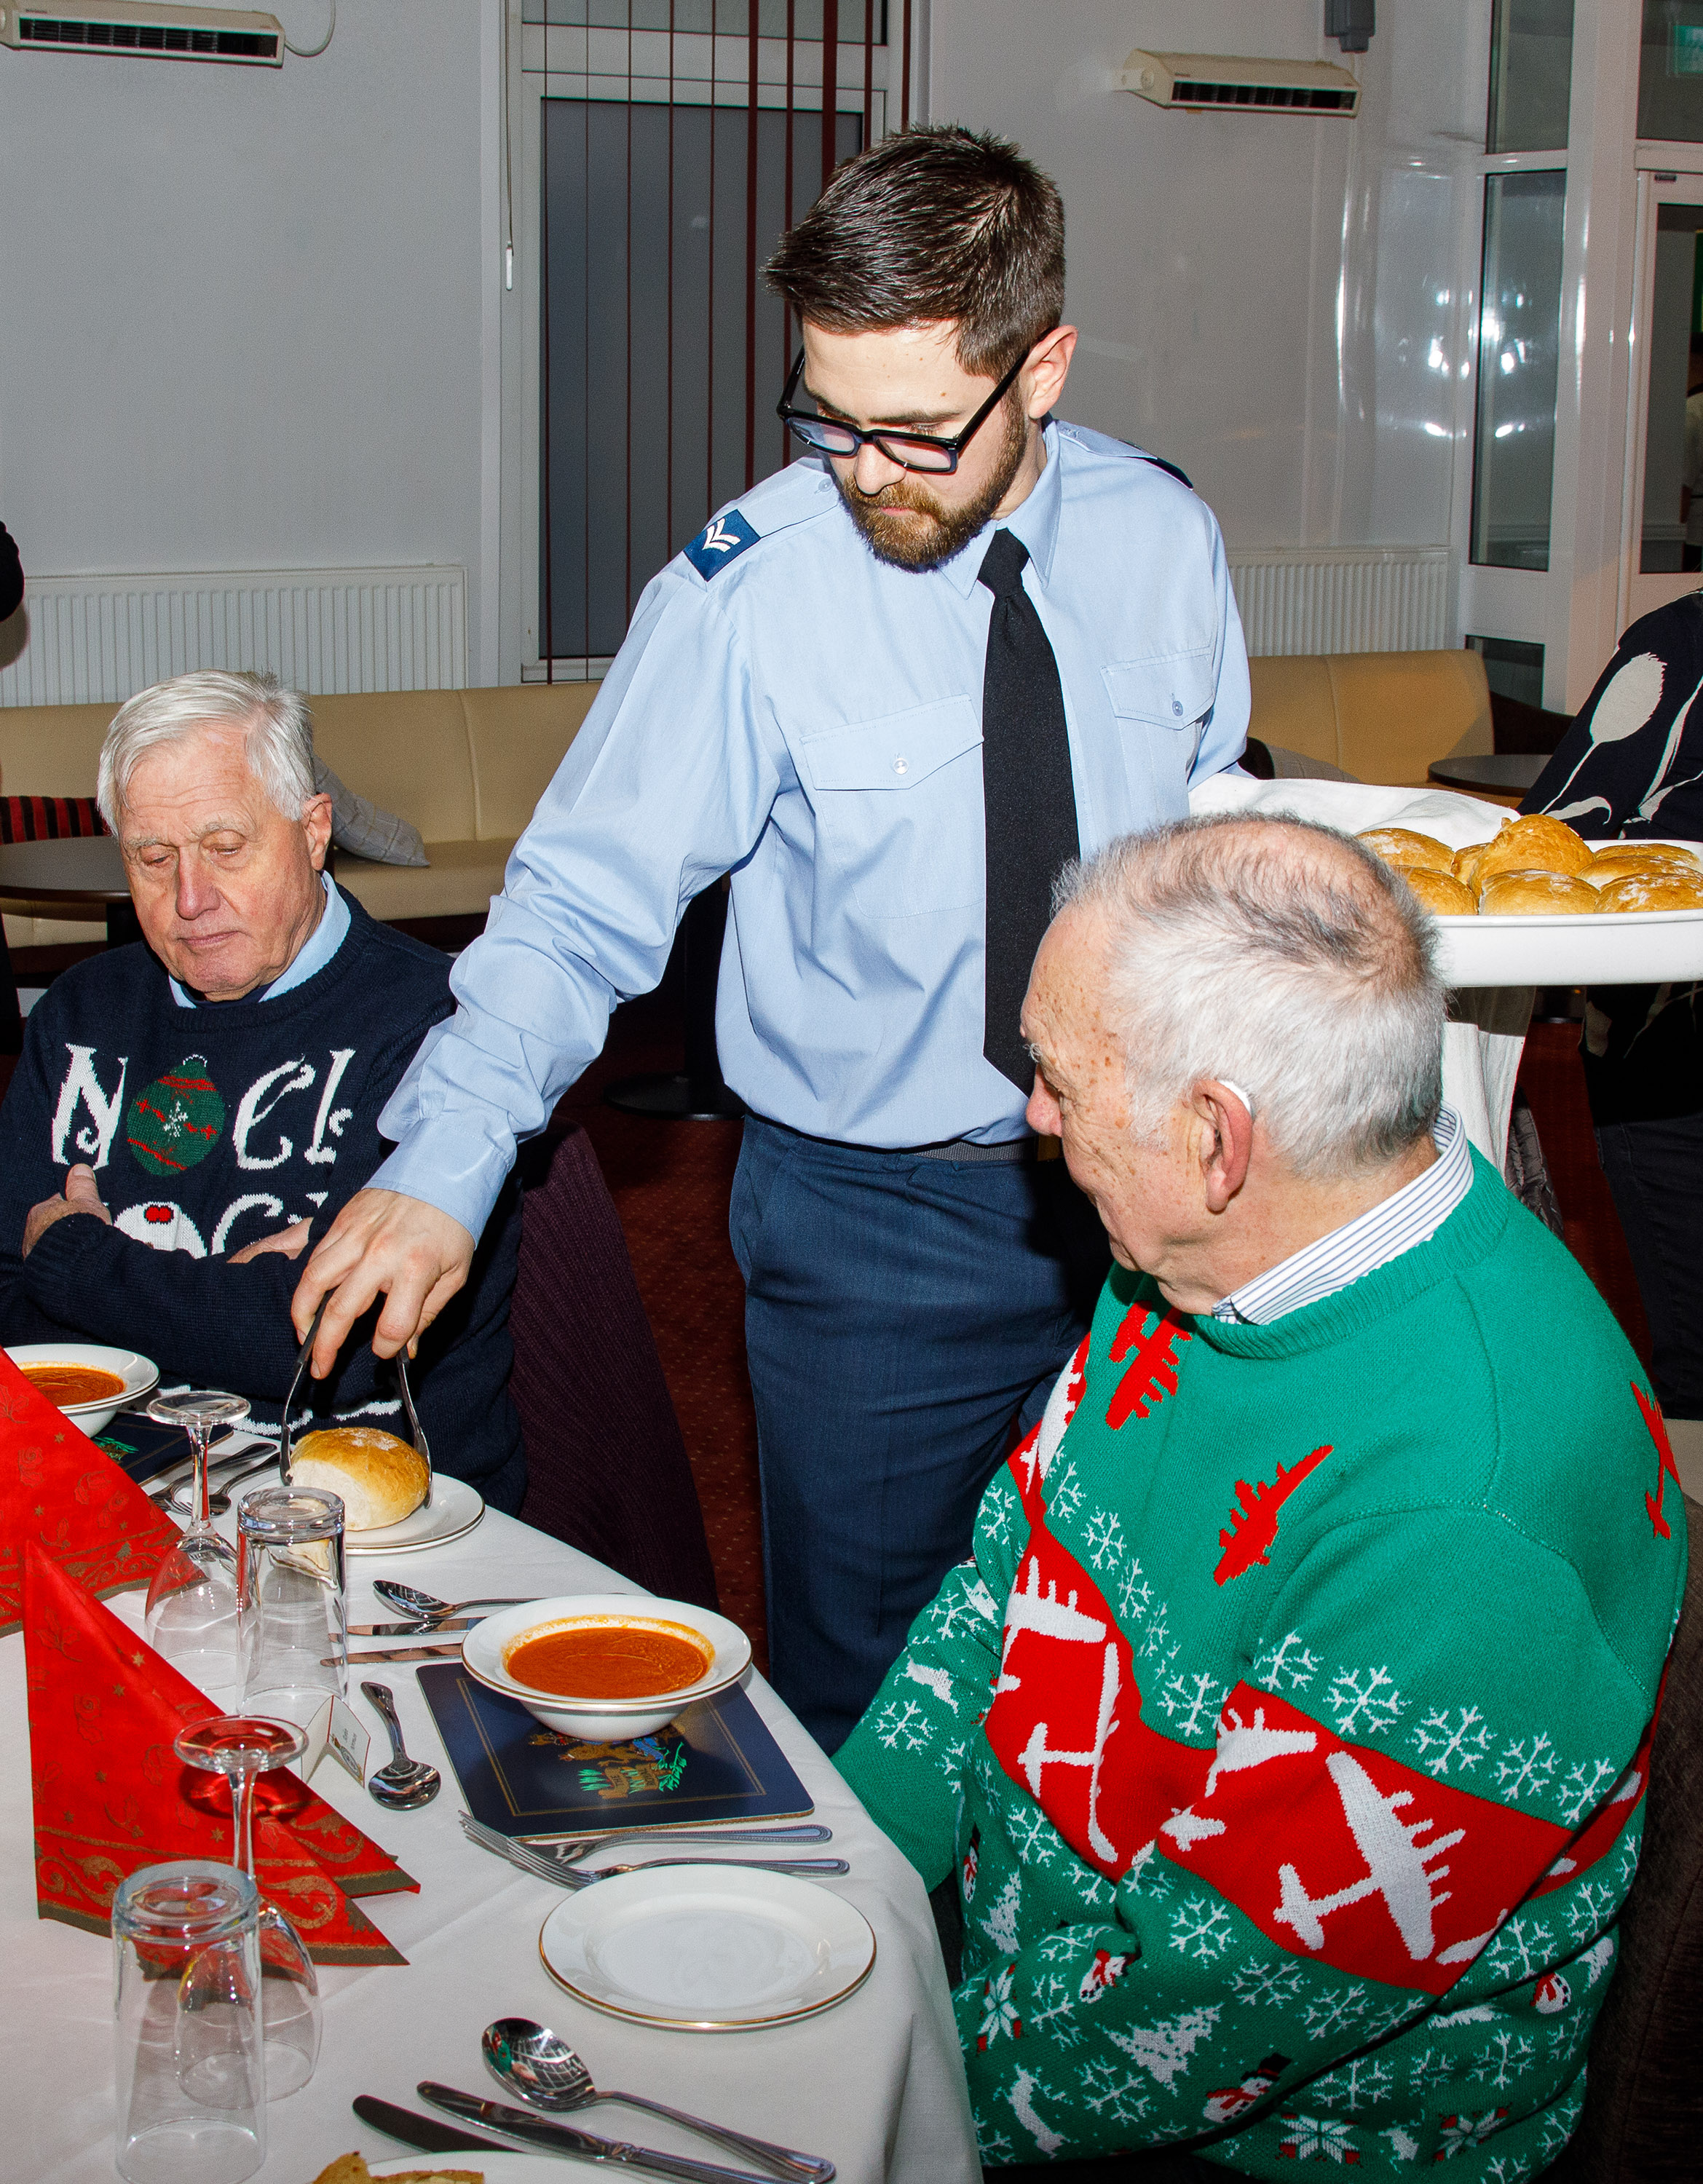 On 6 December, a small team from the Station organised the first Veterans Christmas Lunch since the lockdown started.